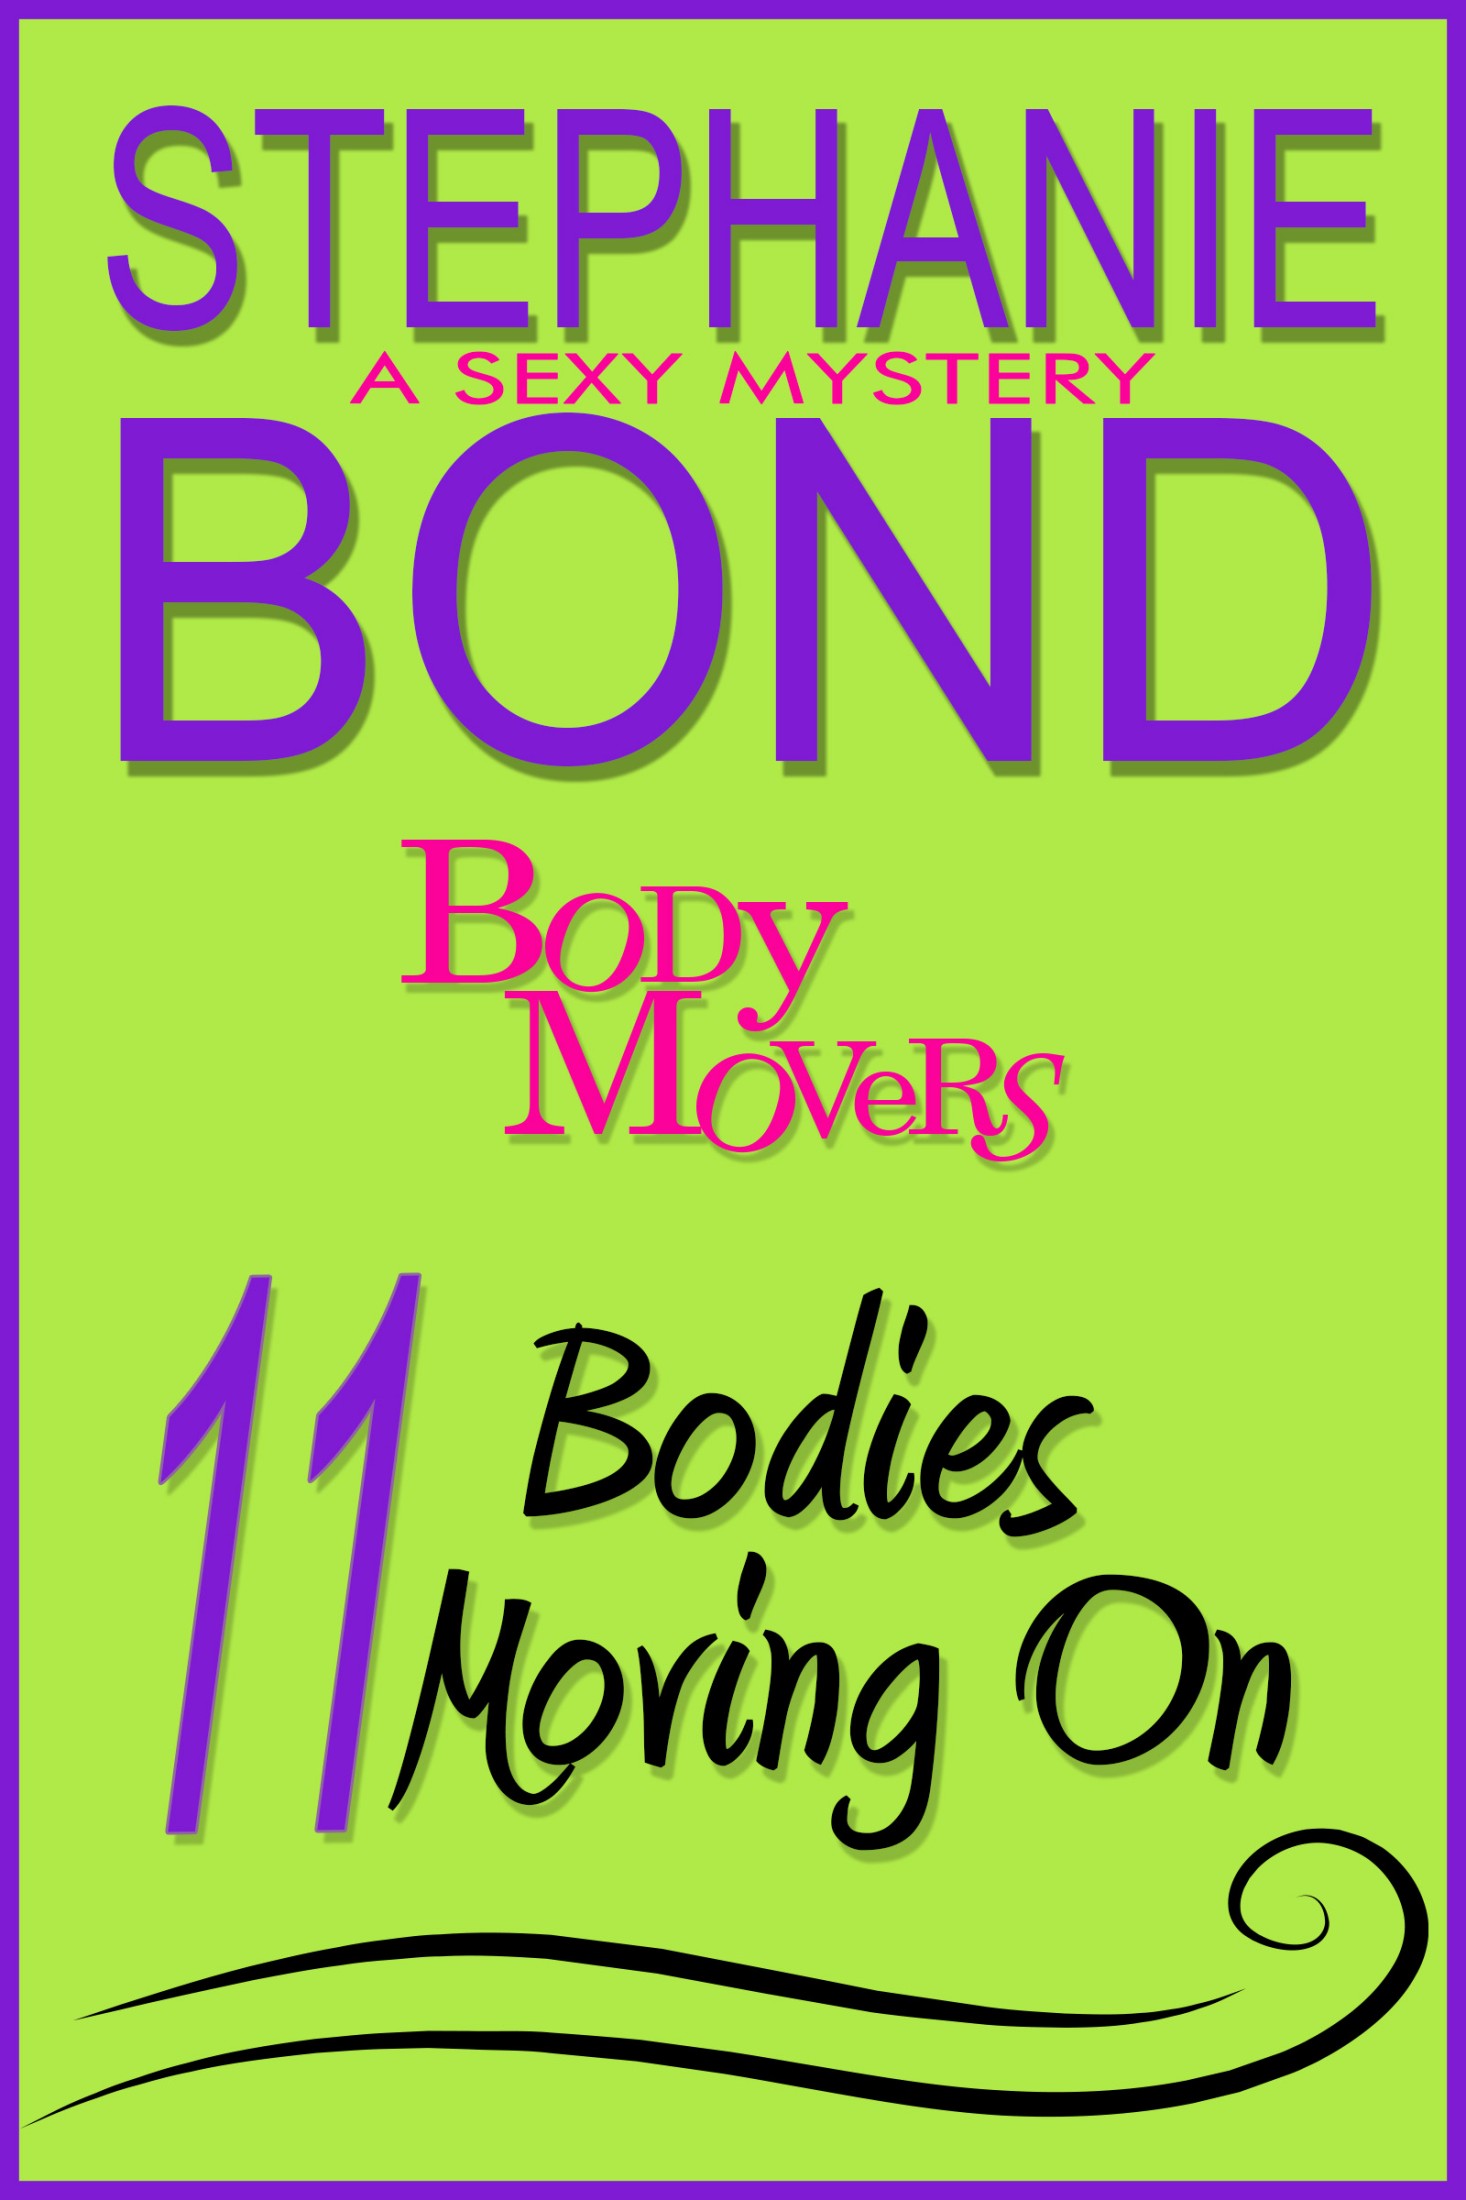 11 Bodies Moving On